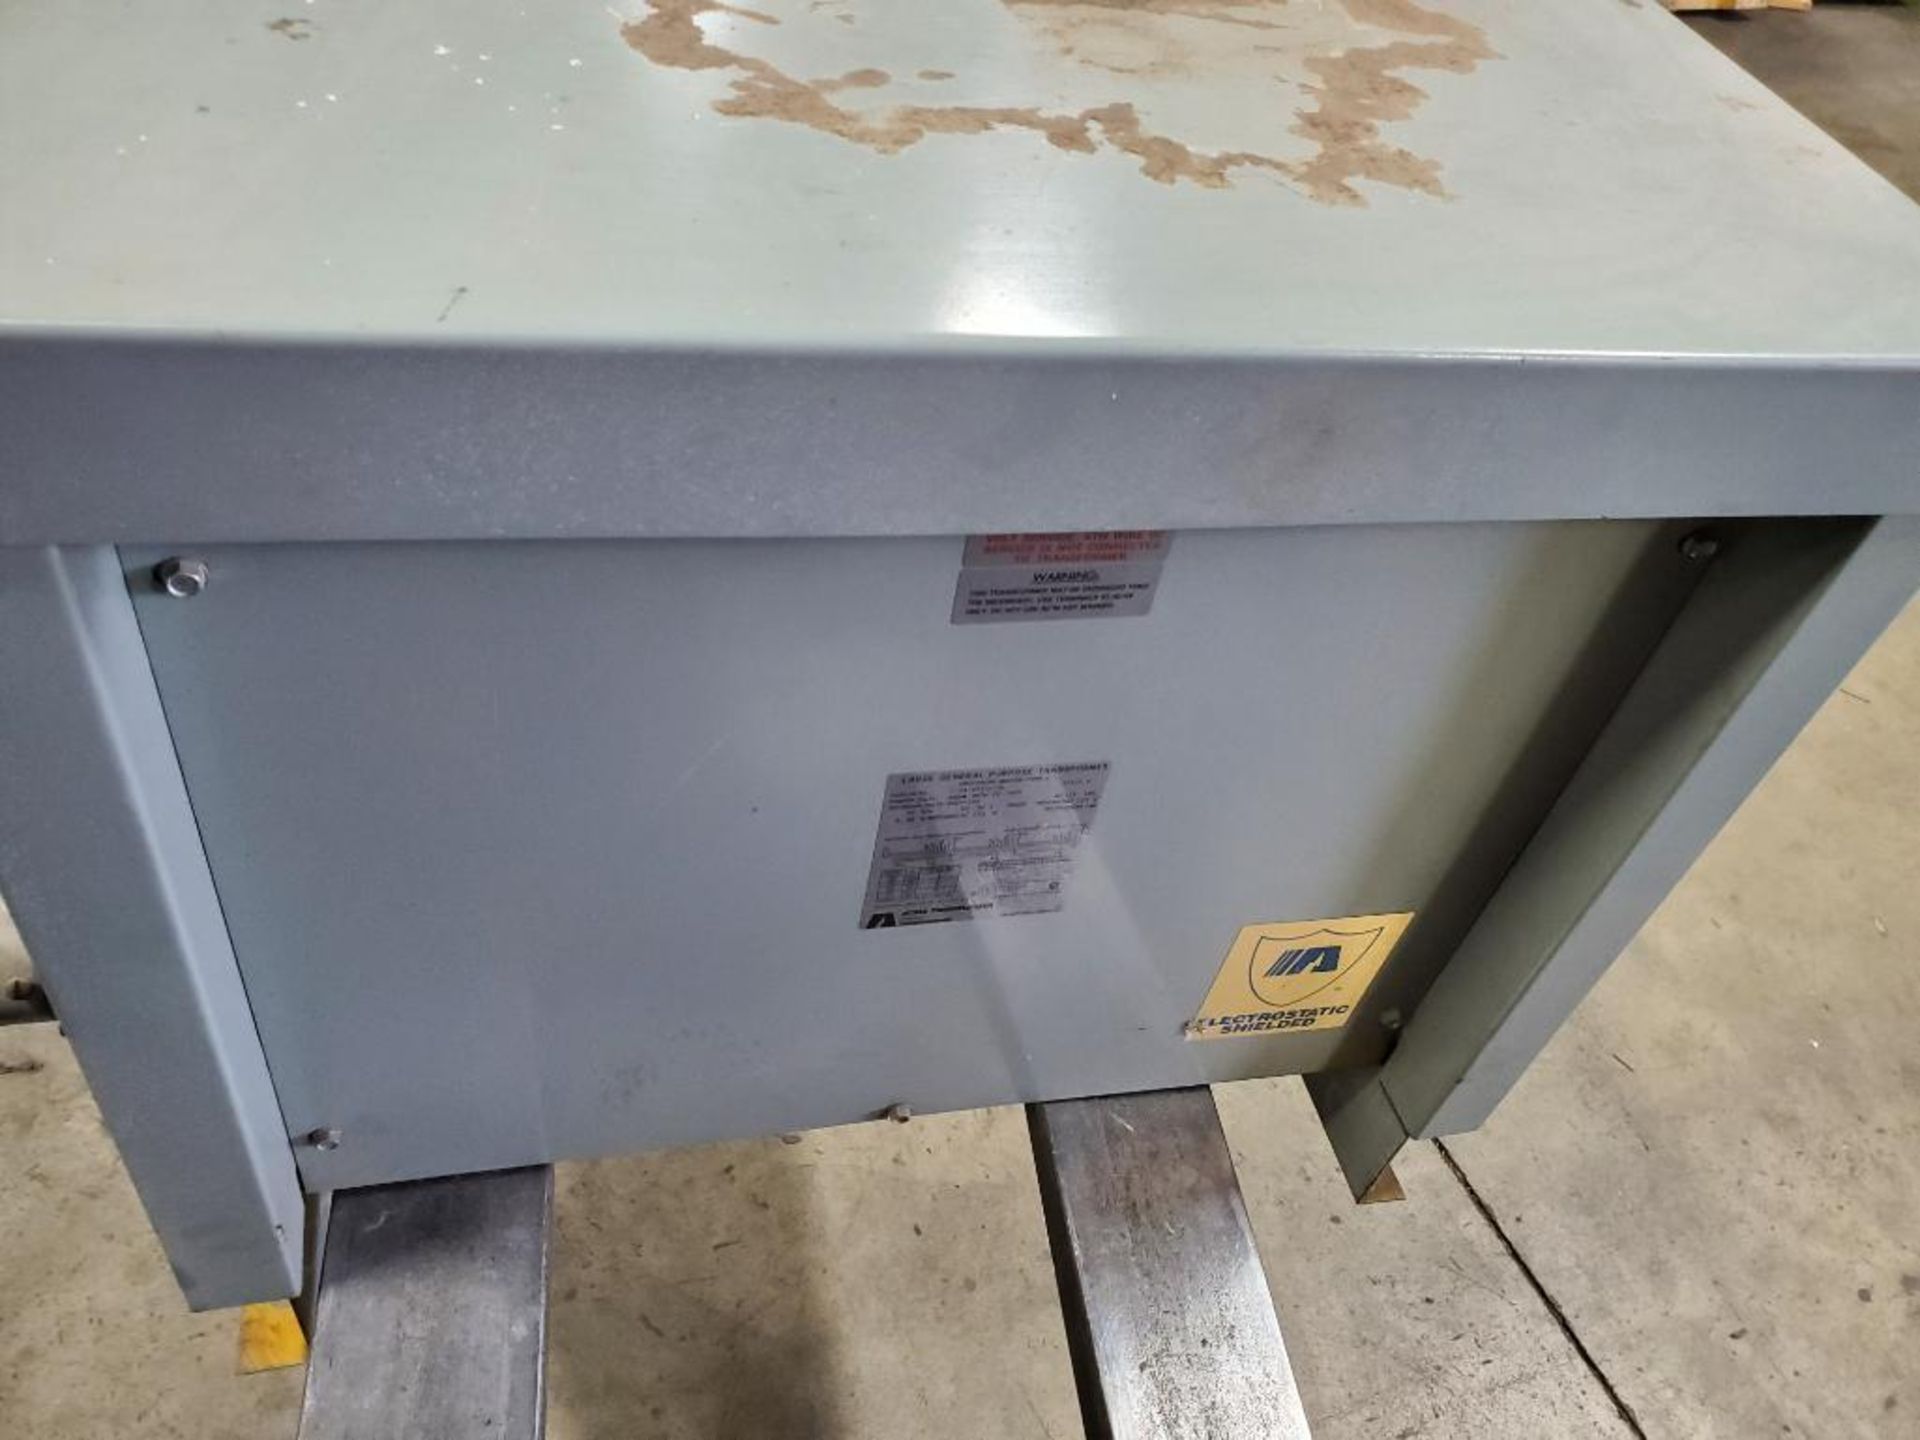 30kVa Acme Transformer. Catalog number T-1A-53312-35. Primary 480v. Secondary 208Y/120. - Image 2 of 11